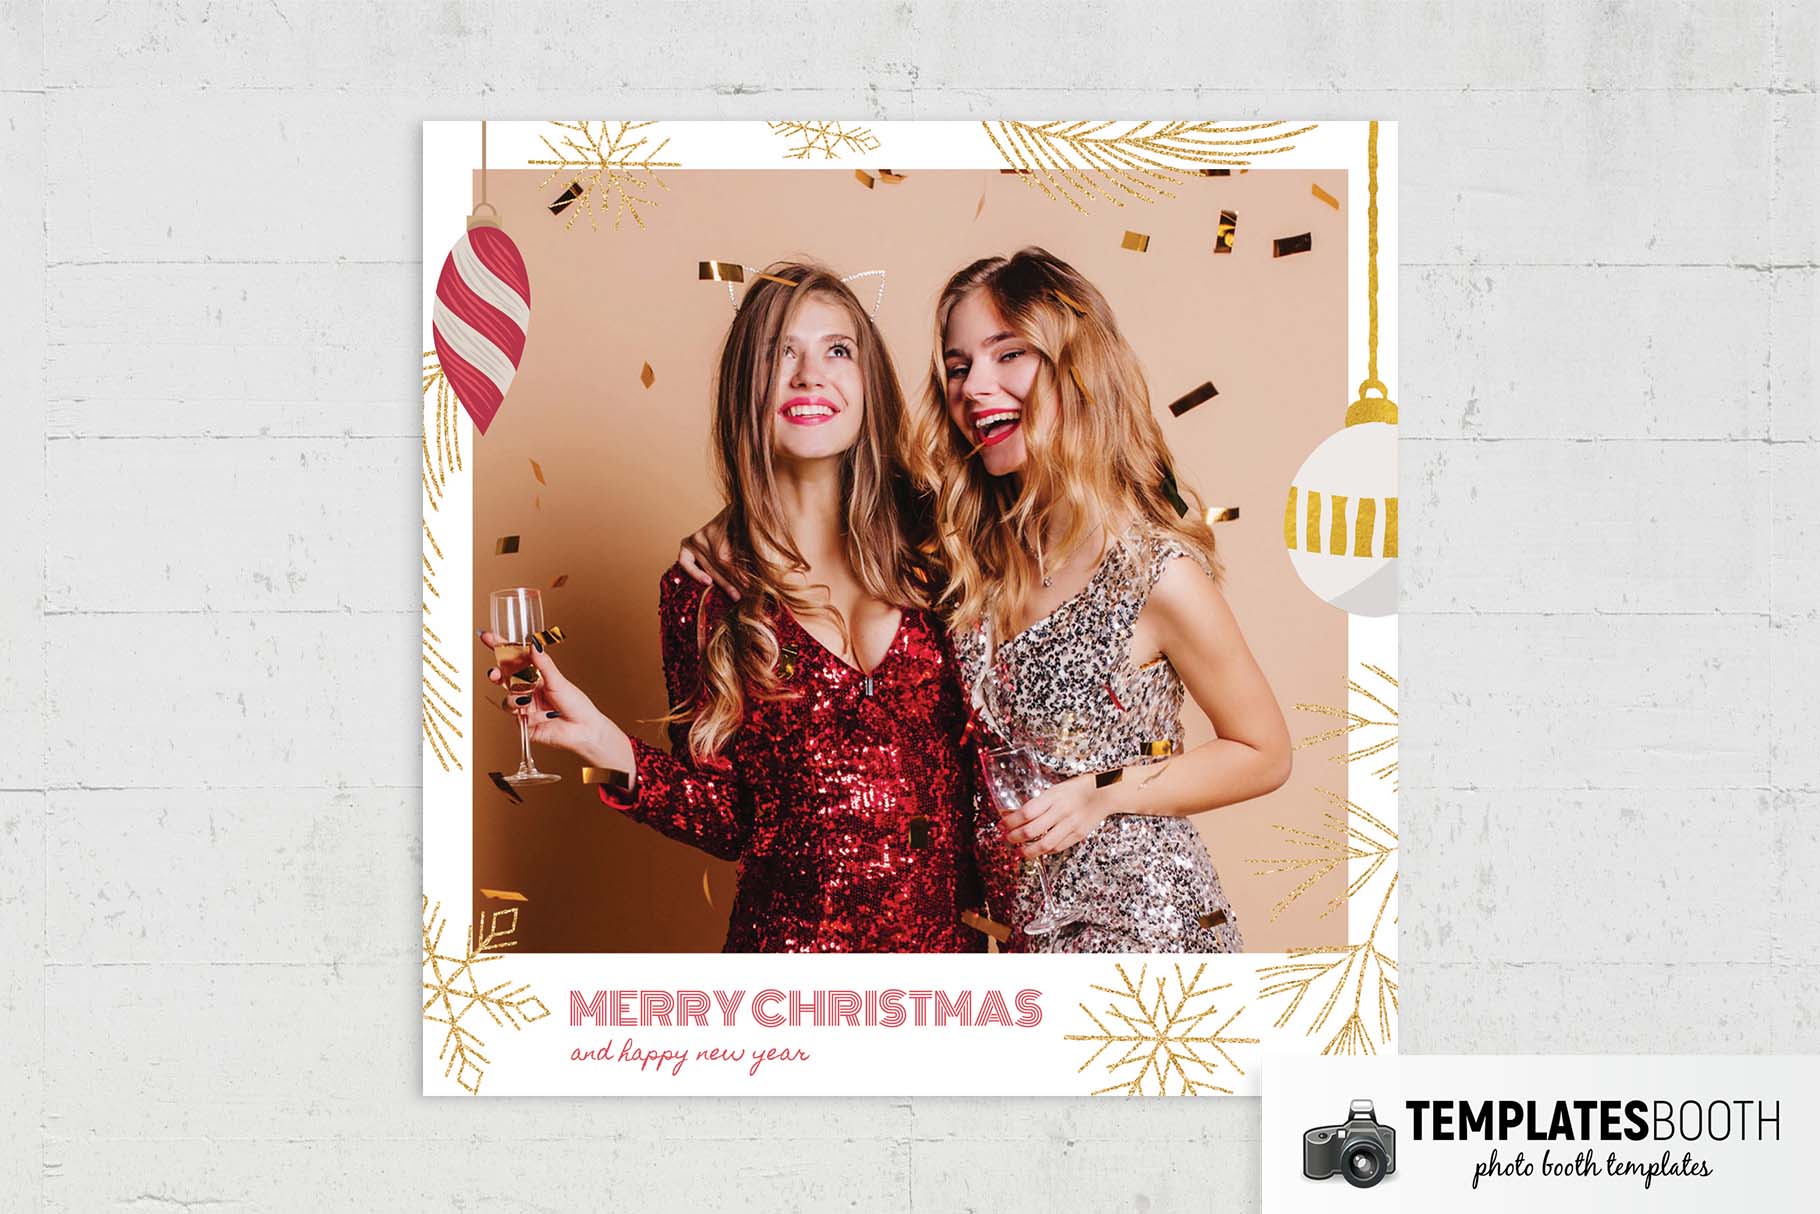 Decorated Christmas Photo Booth Template